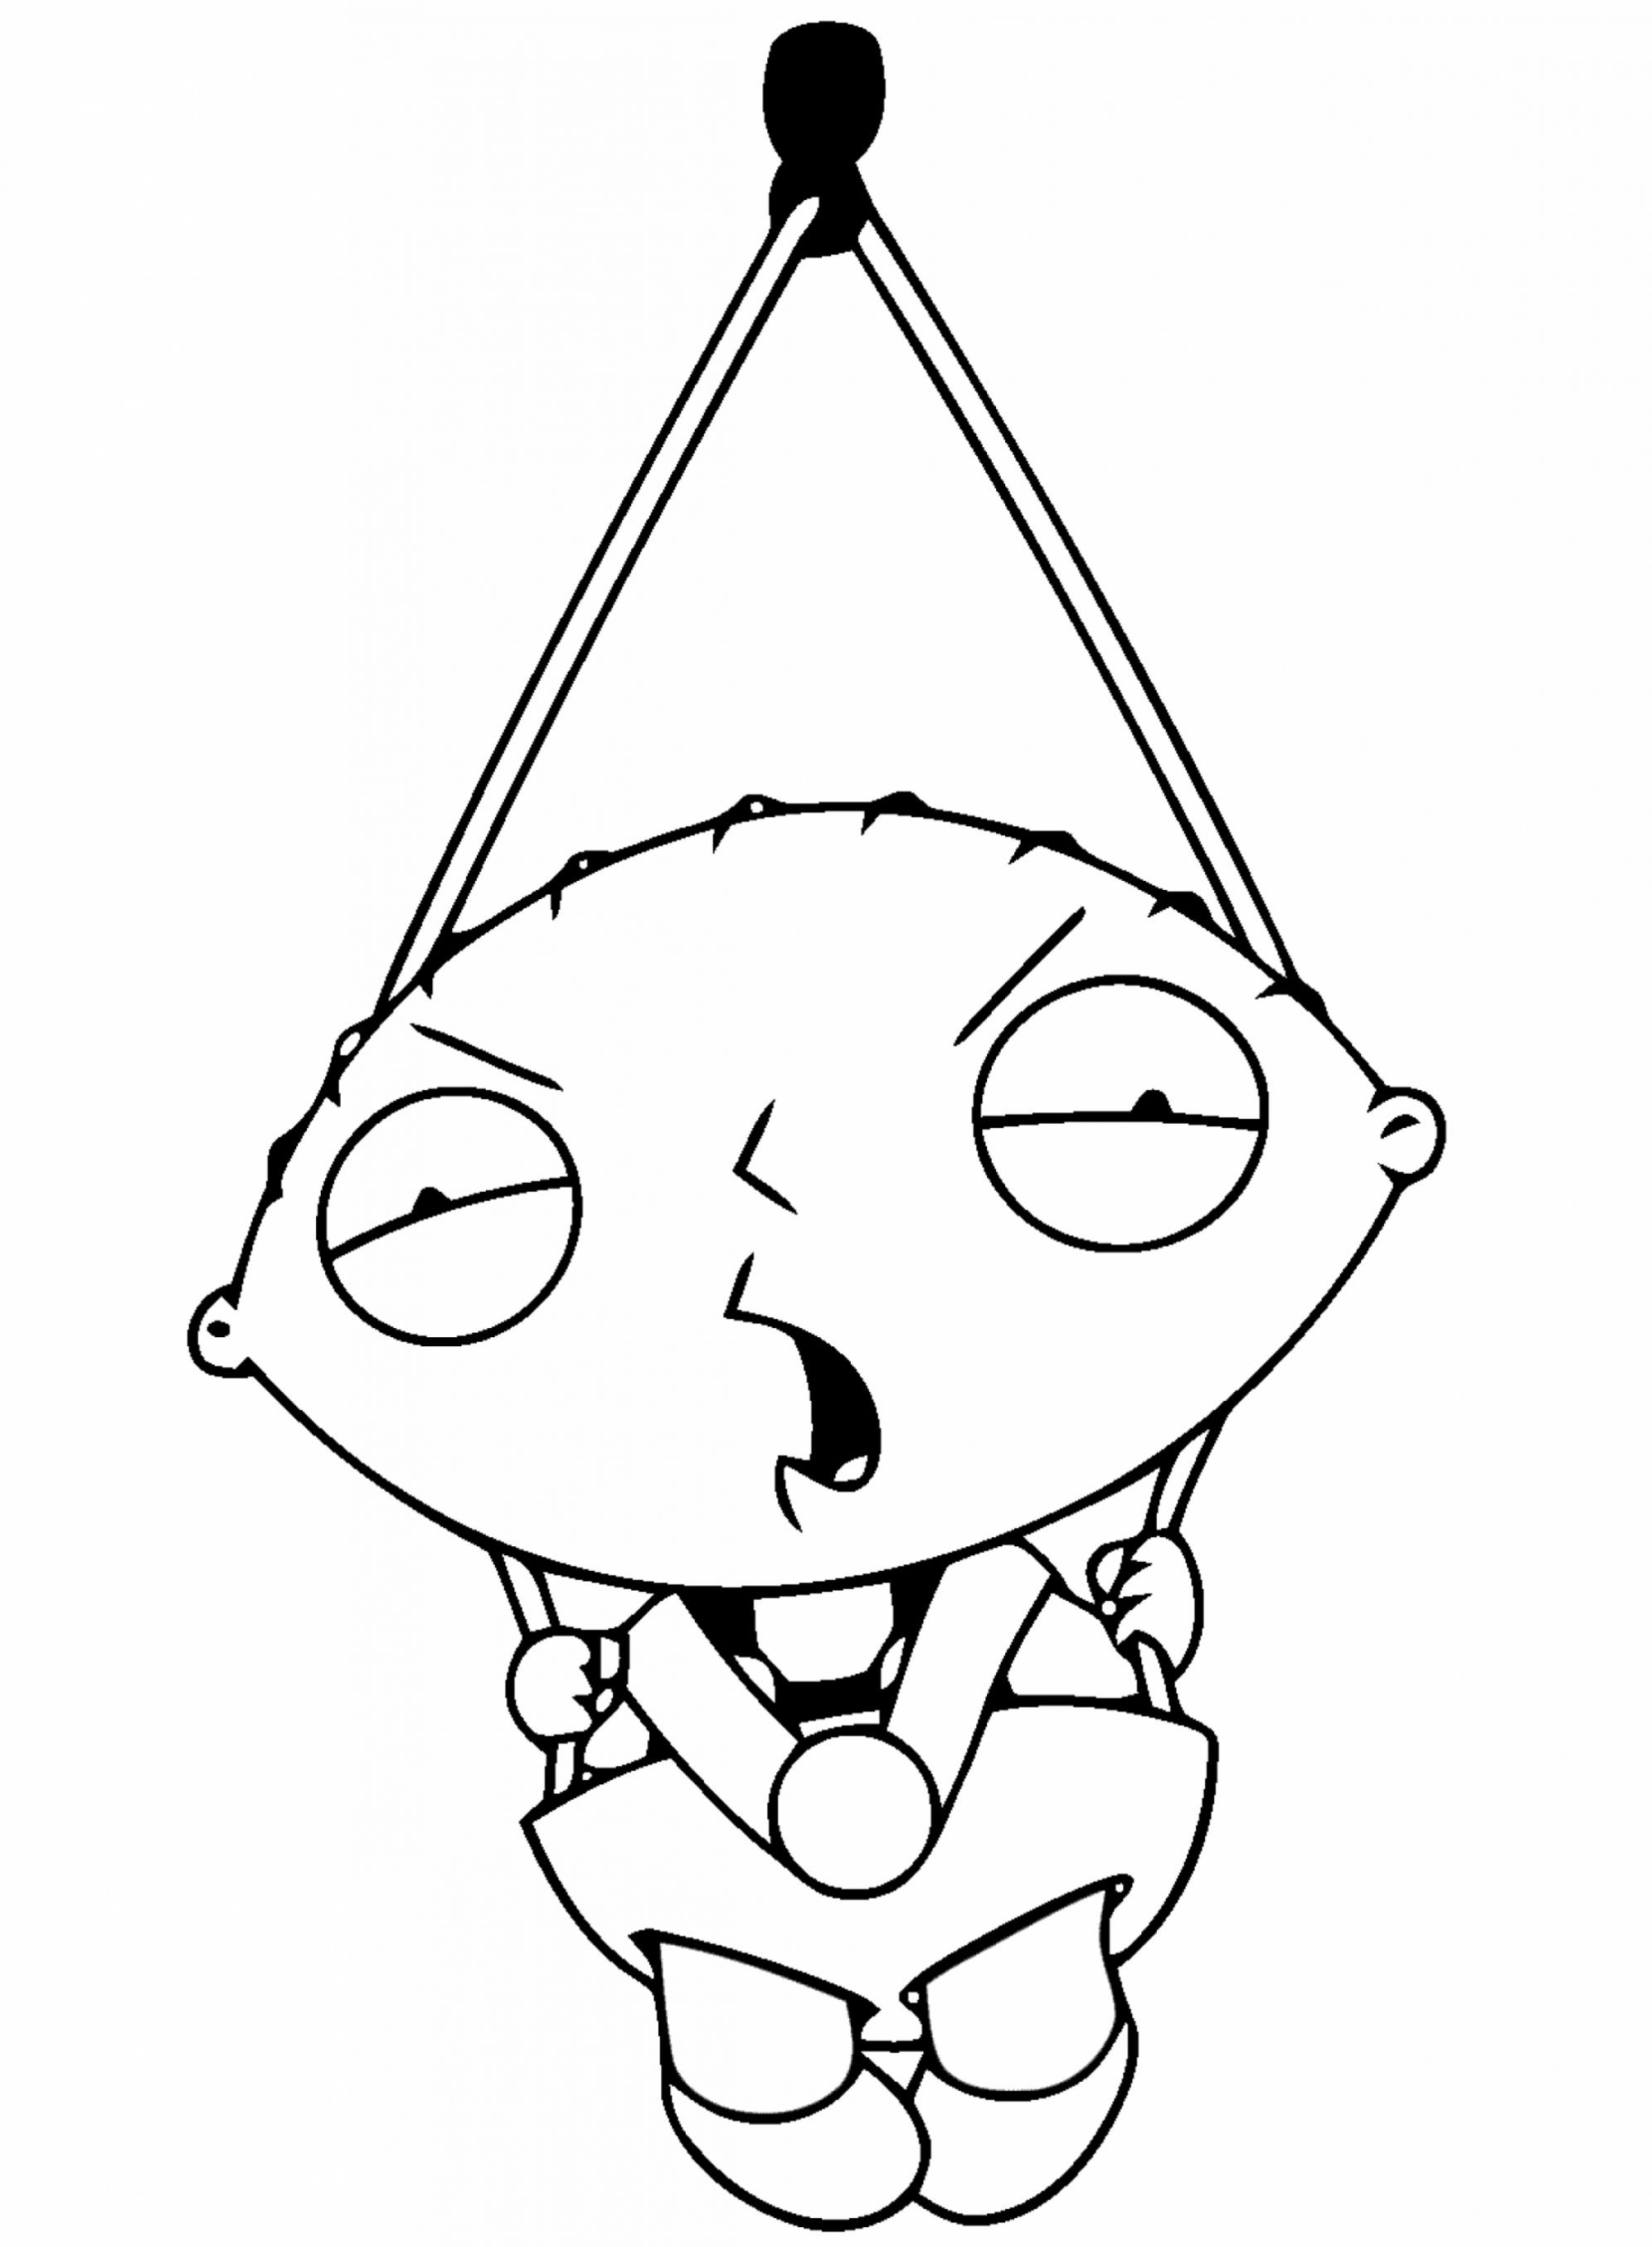 Cartoon Coloring Pages Best Coloring Pages For Kids